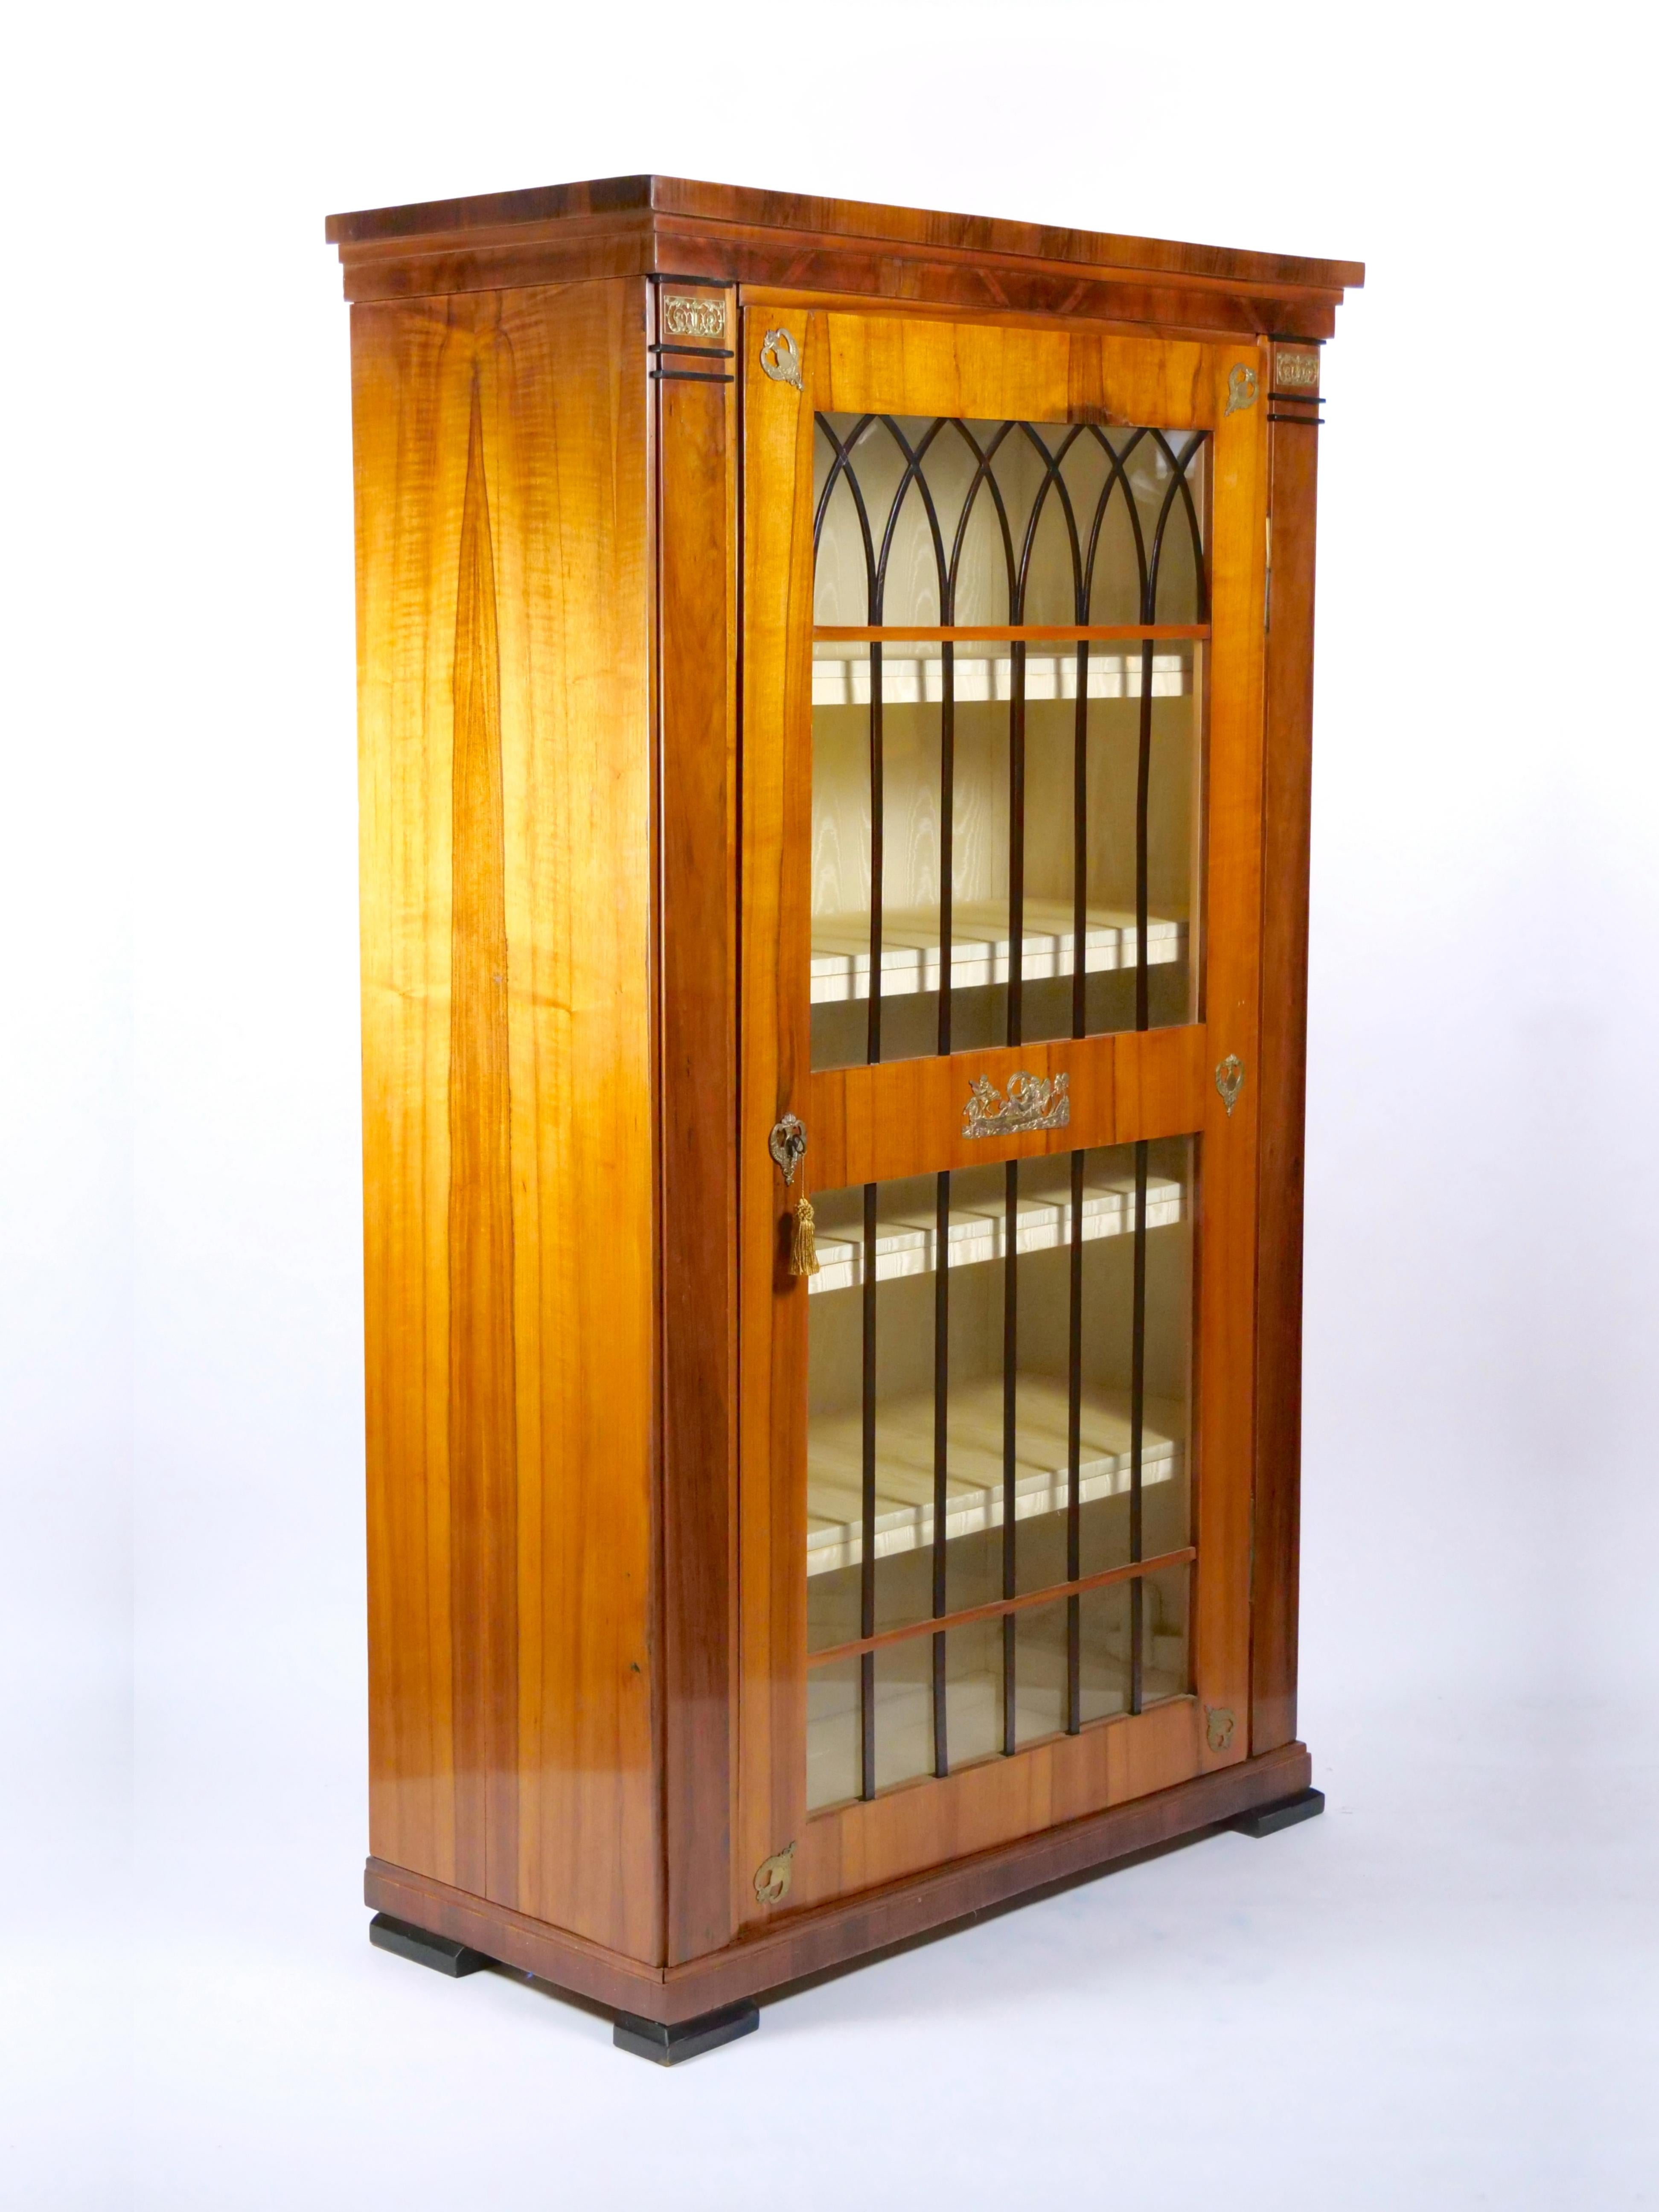 
Step into the world of the early 19th century with our impeccably crafted Biedermeier cabinet, hailing from the Austro-Hungarian, German, or Northern European origins. This exceptional piece is a true testament to the artistry and attention to